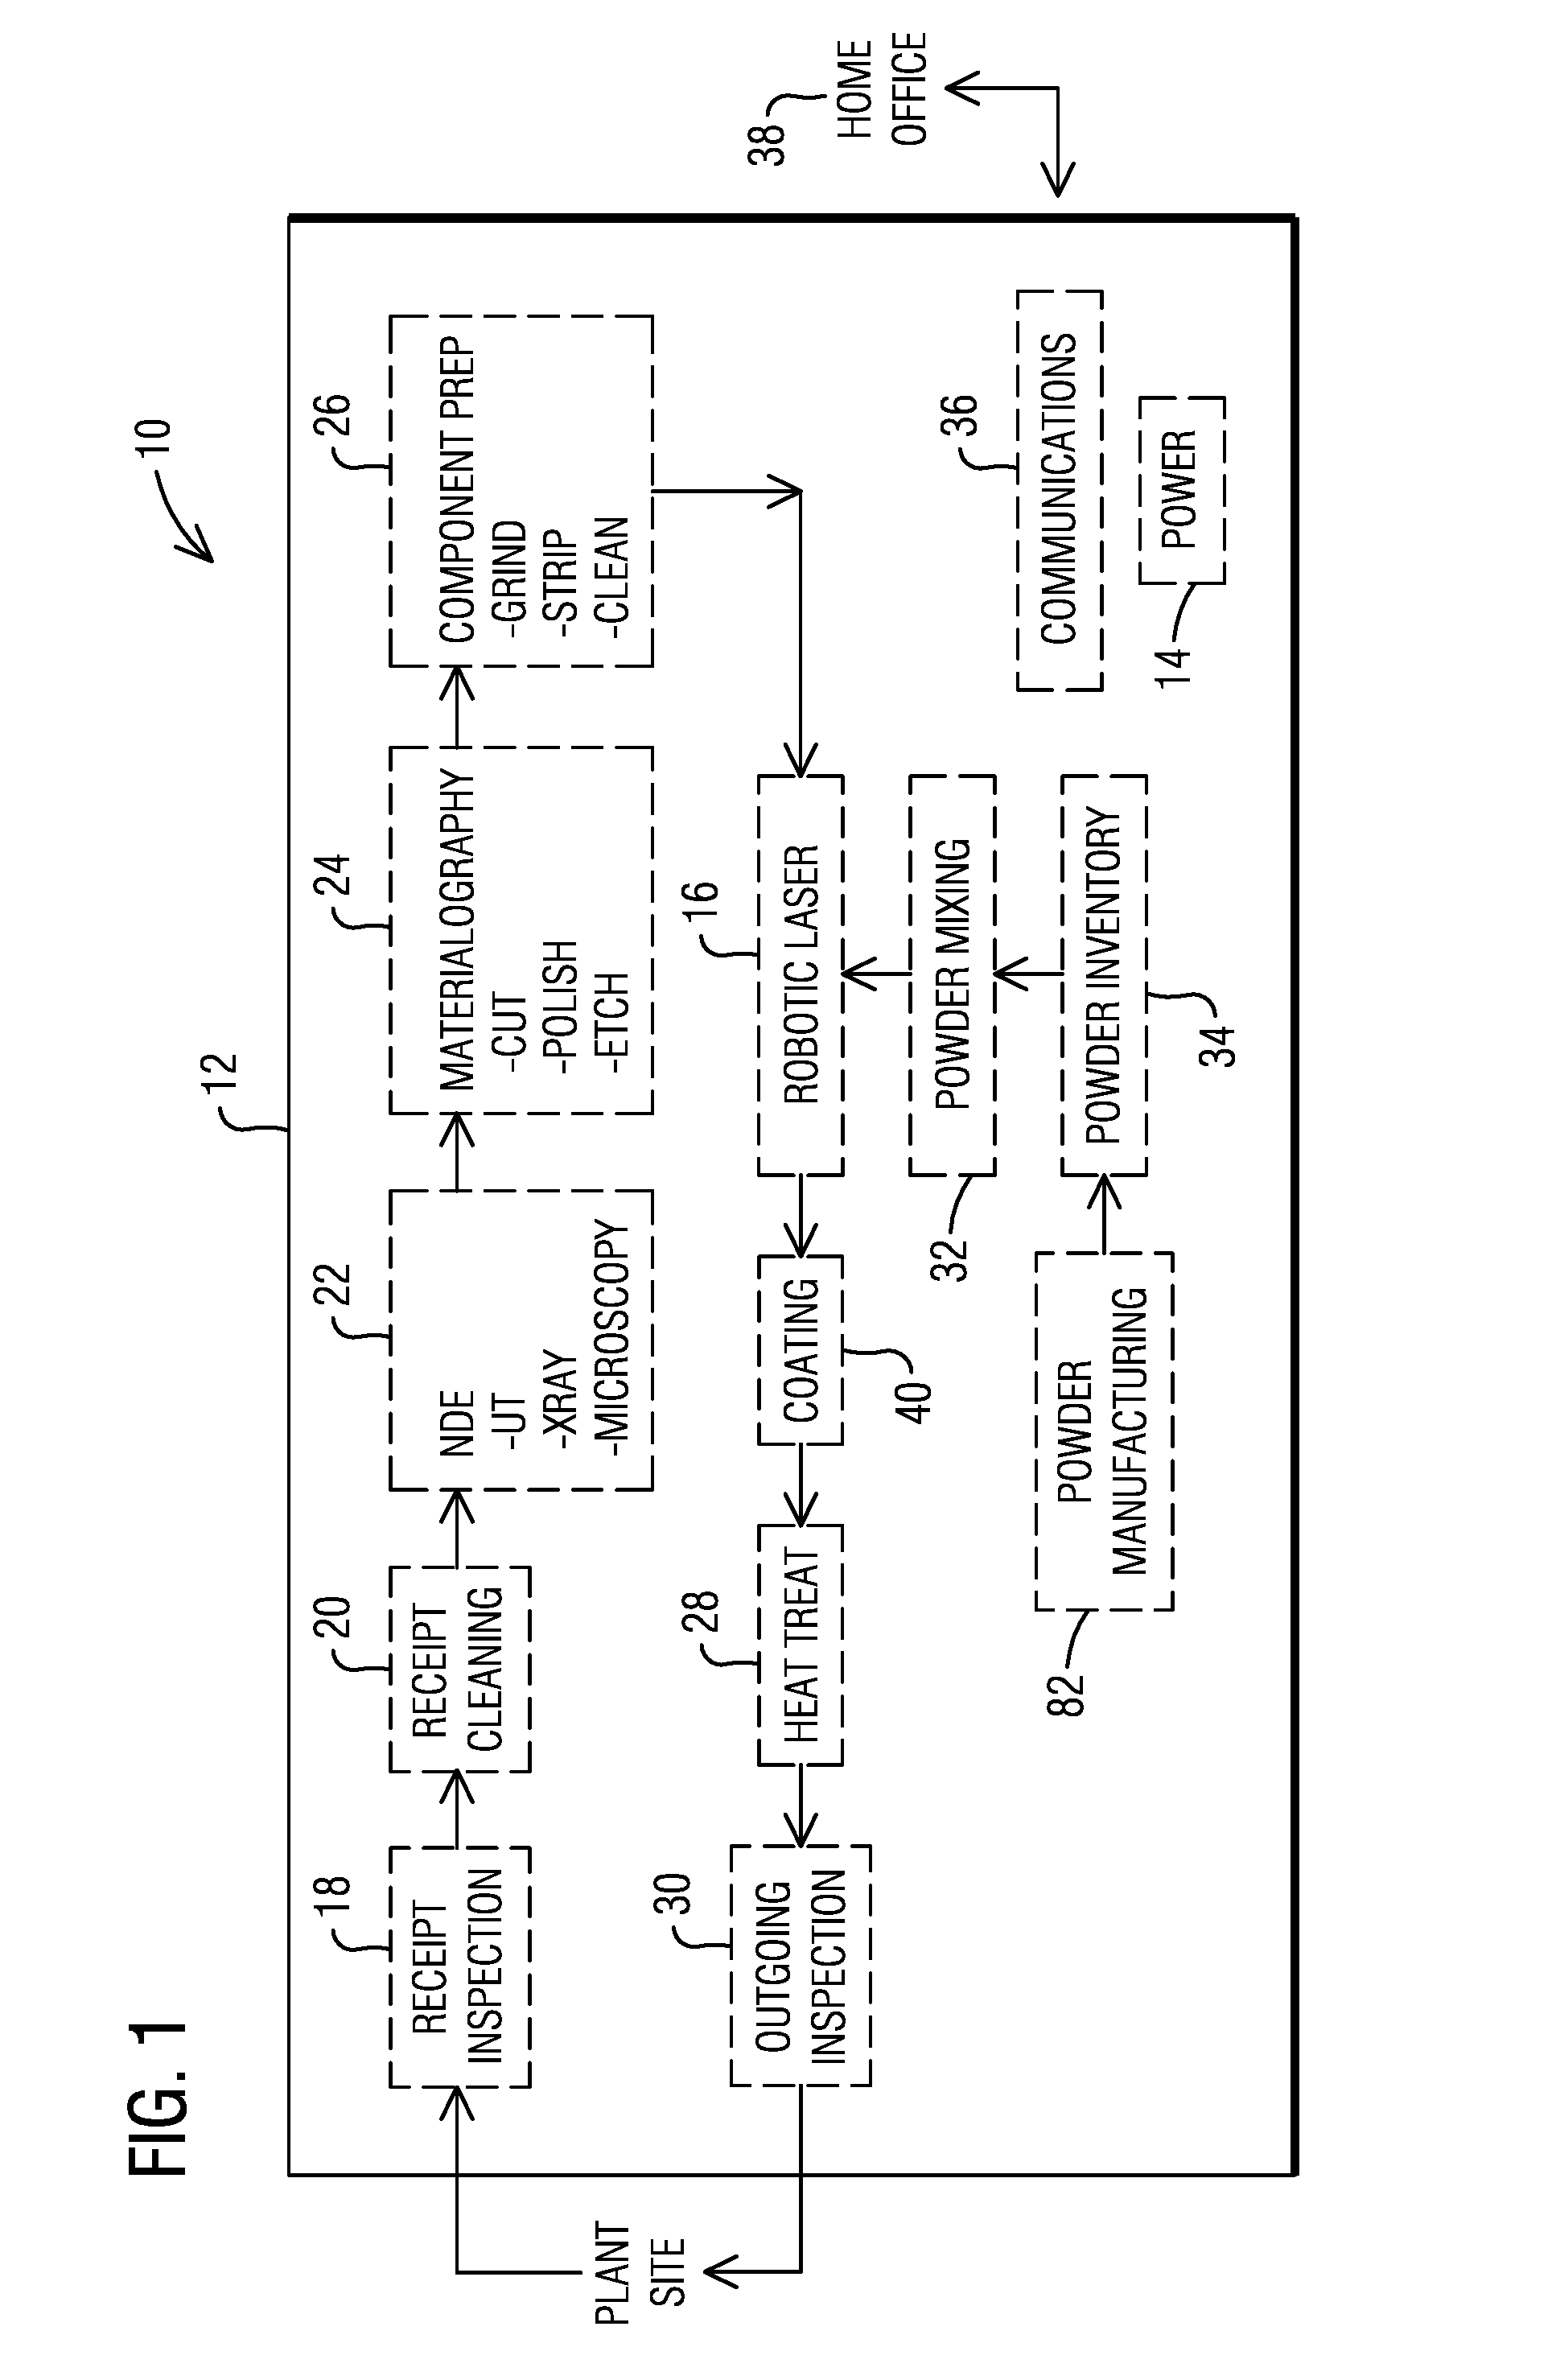 Mobile repair and manufacturing apparatus and method for gas turbine engine maintenance